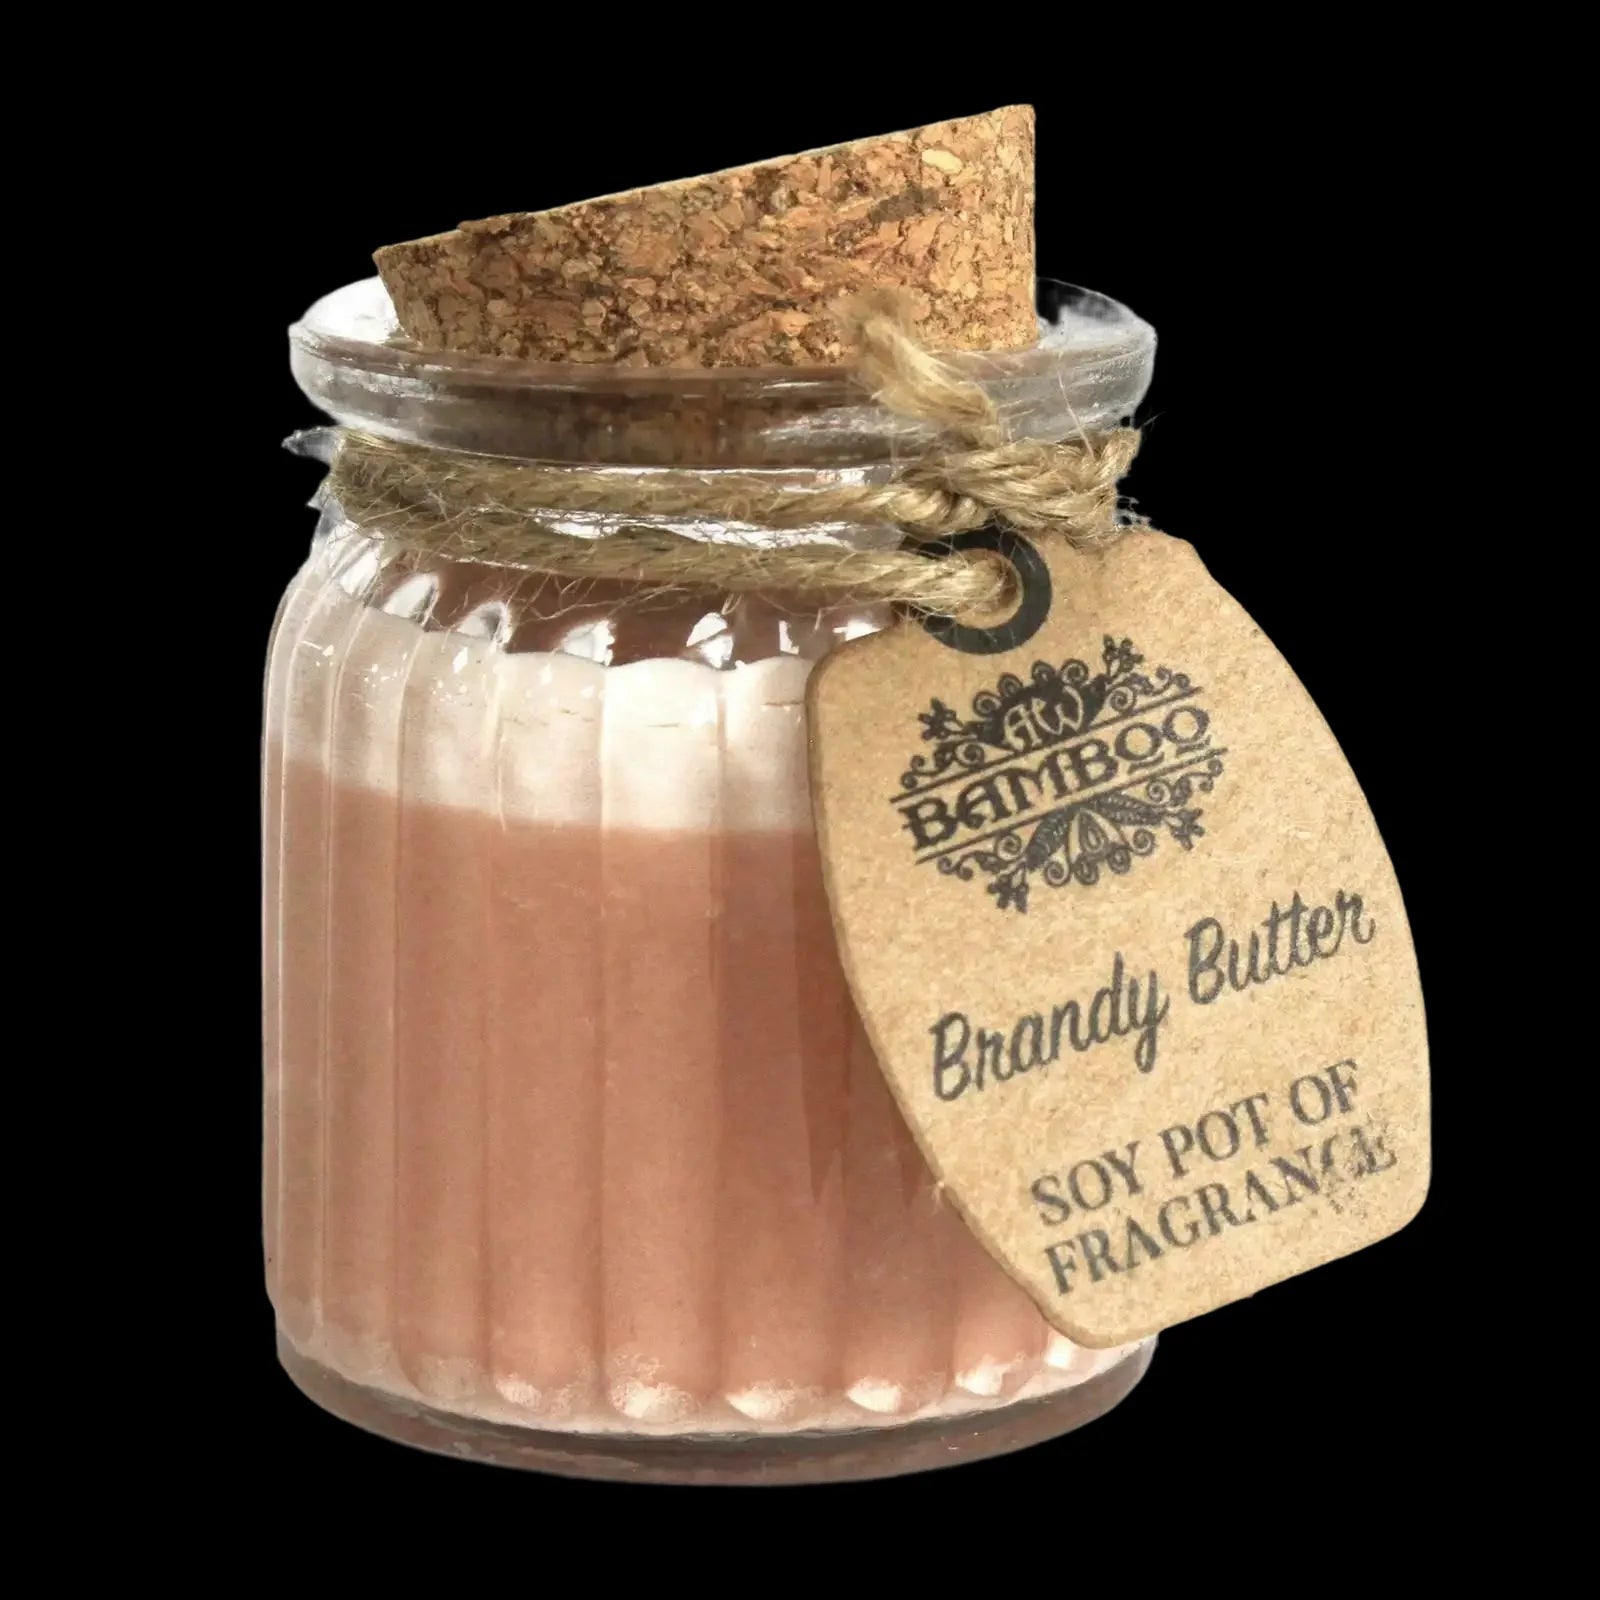 Brandy Butter Soy Pot Of Fragrance Candles - Ancient Wisdom